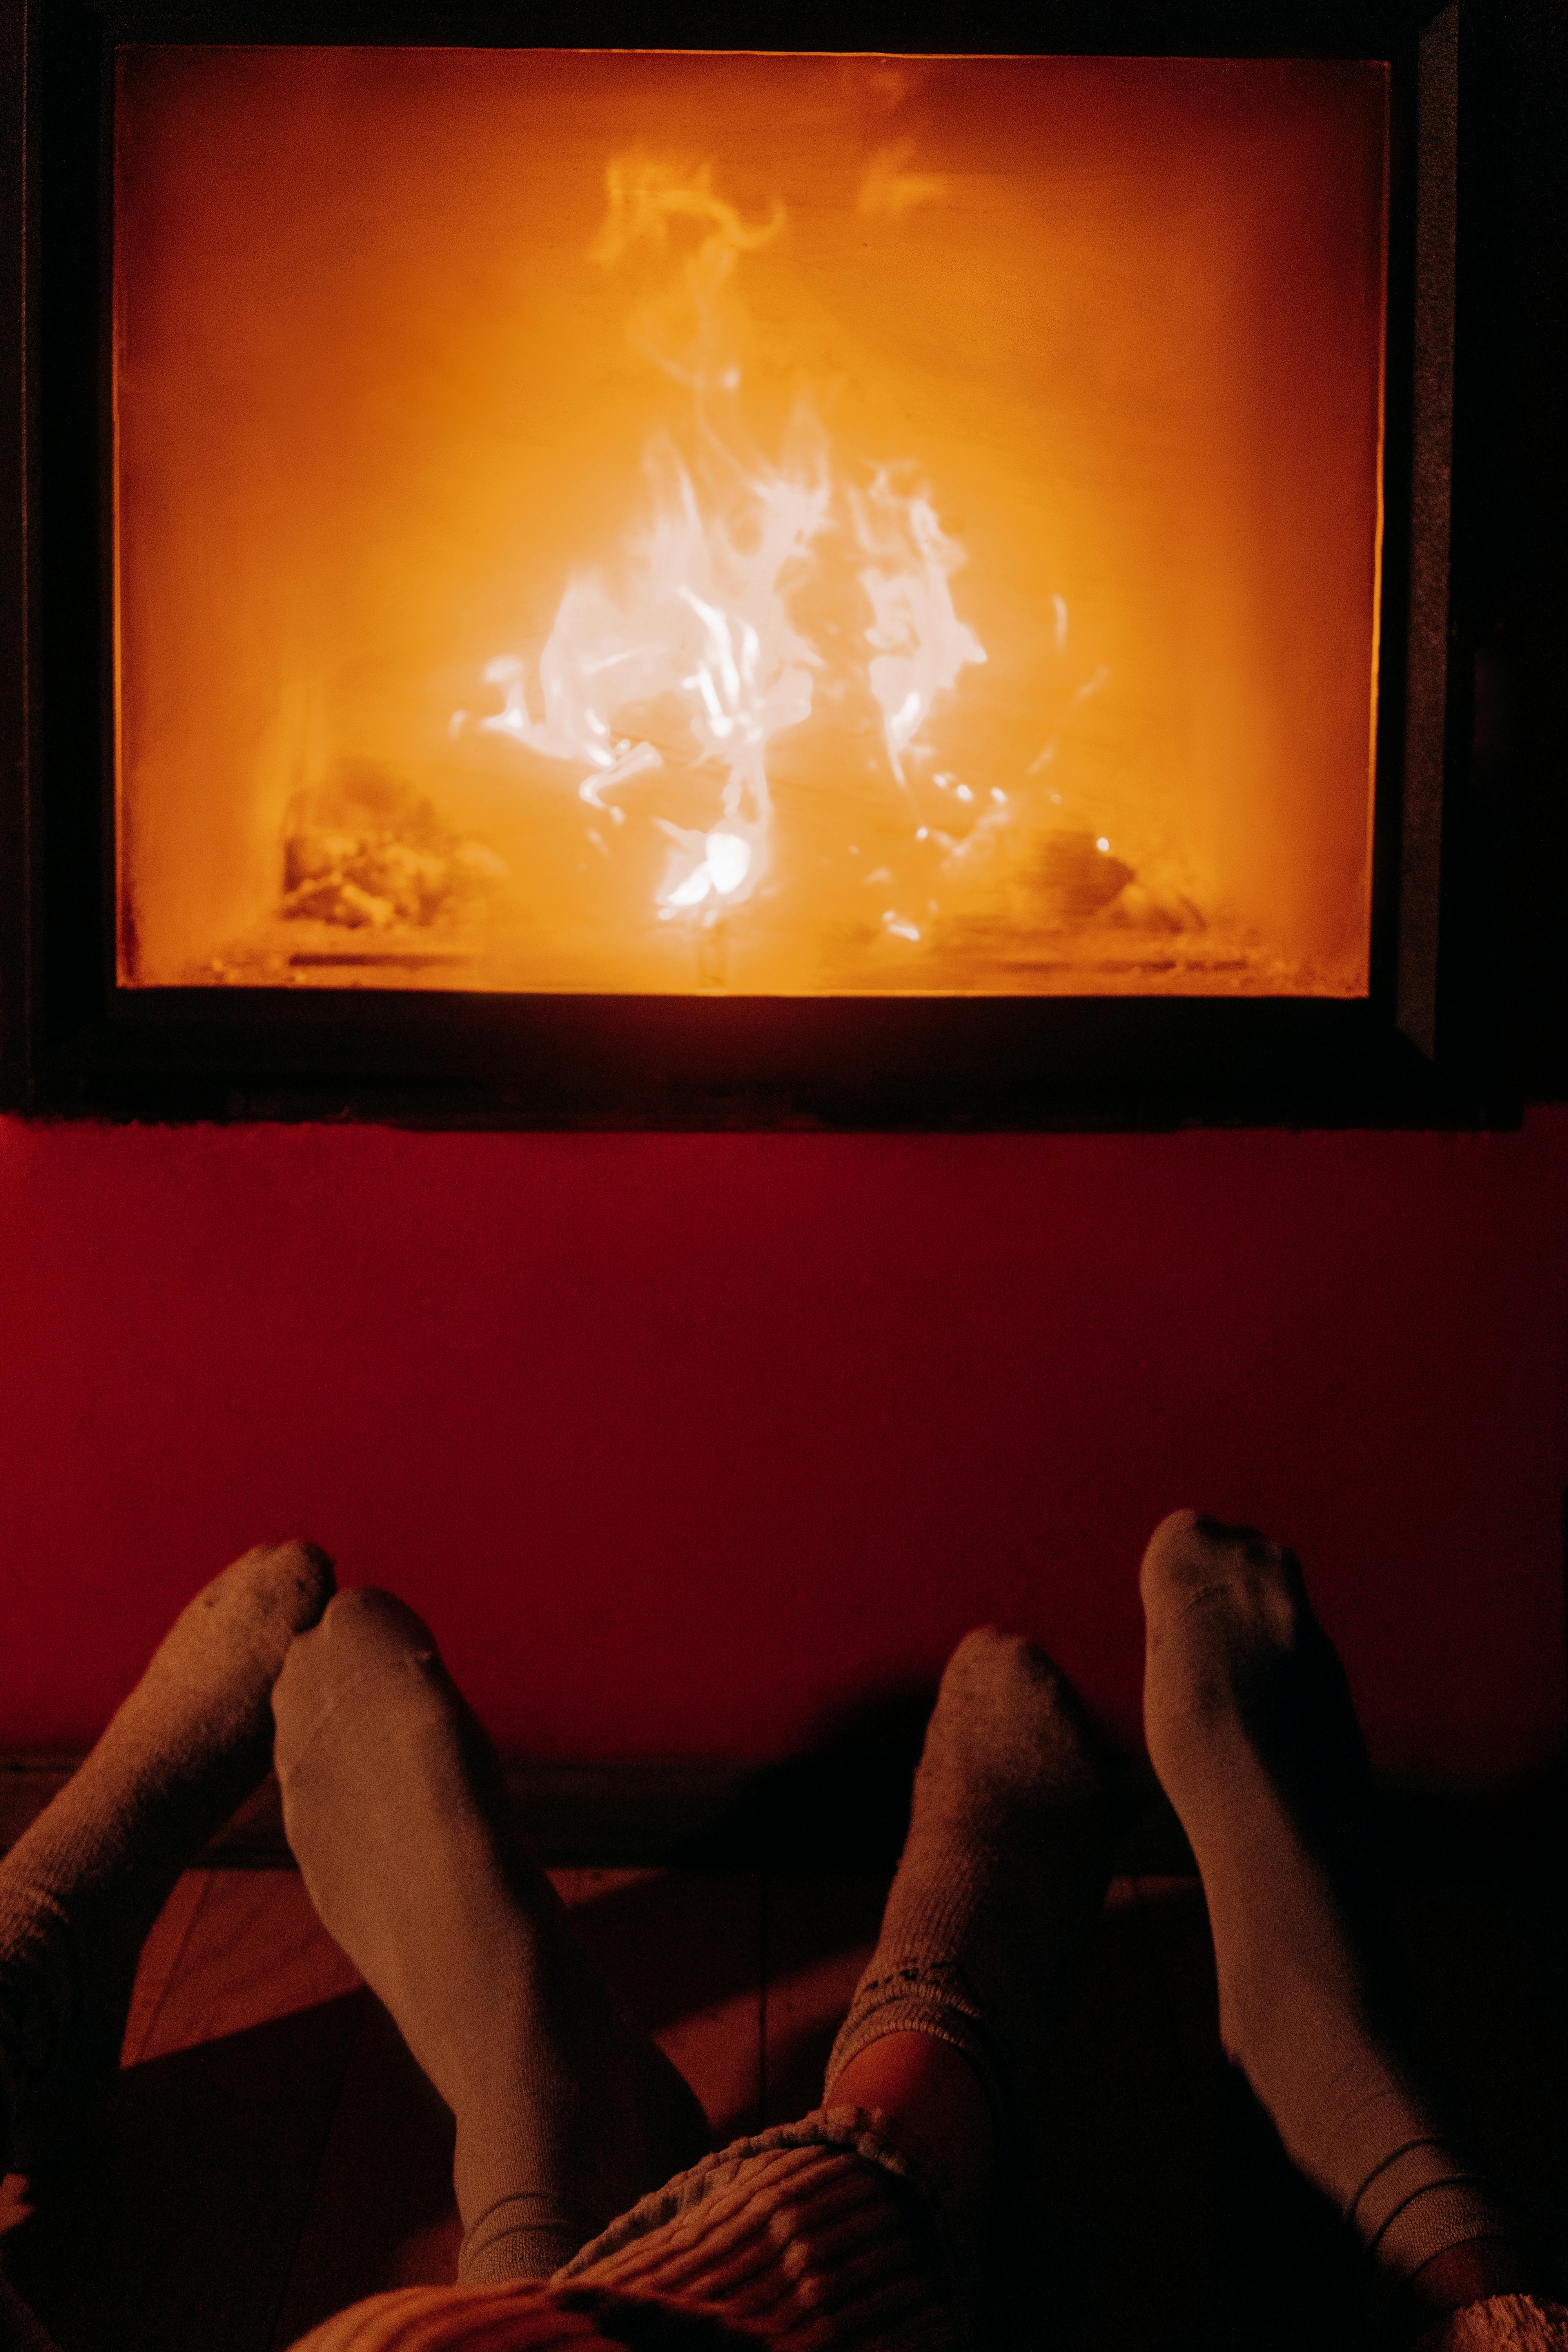 couples warming feet next to fireplace